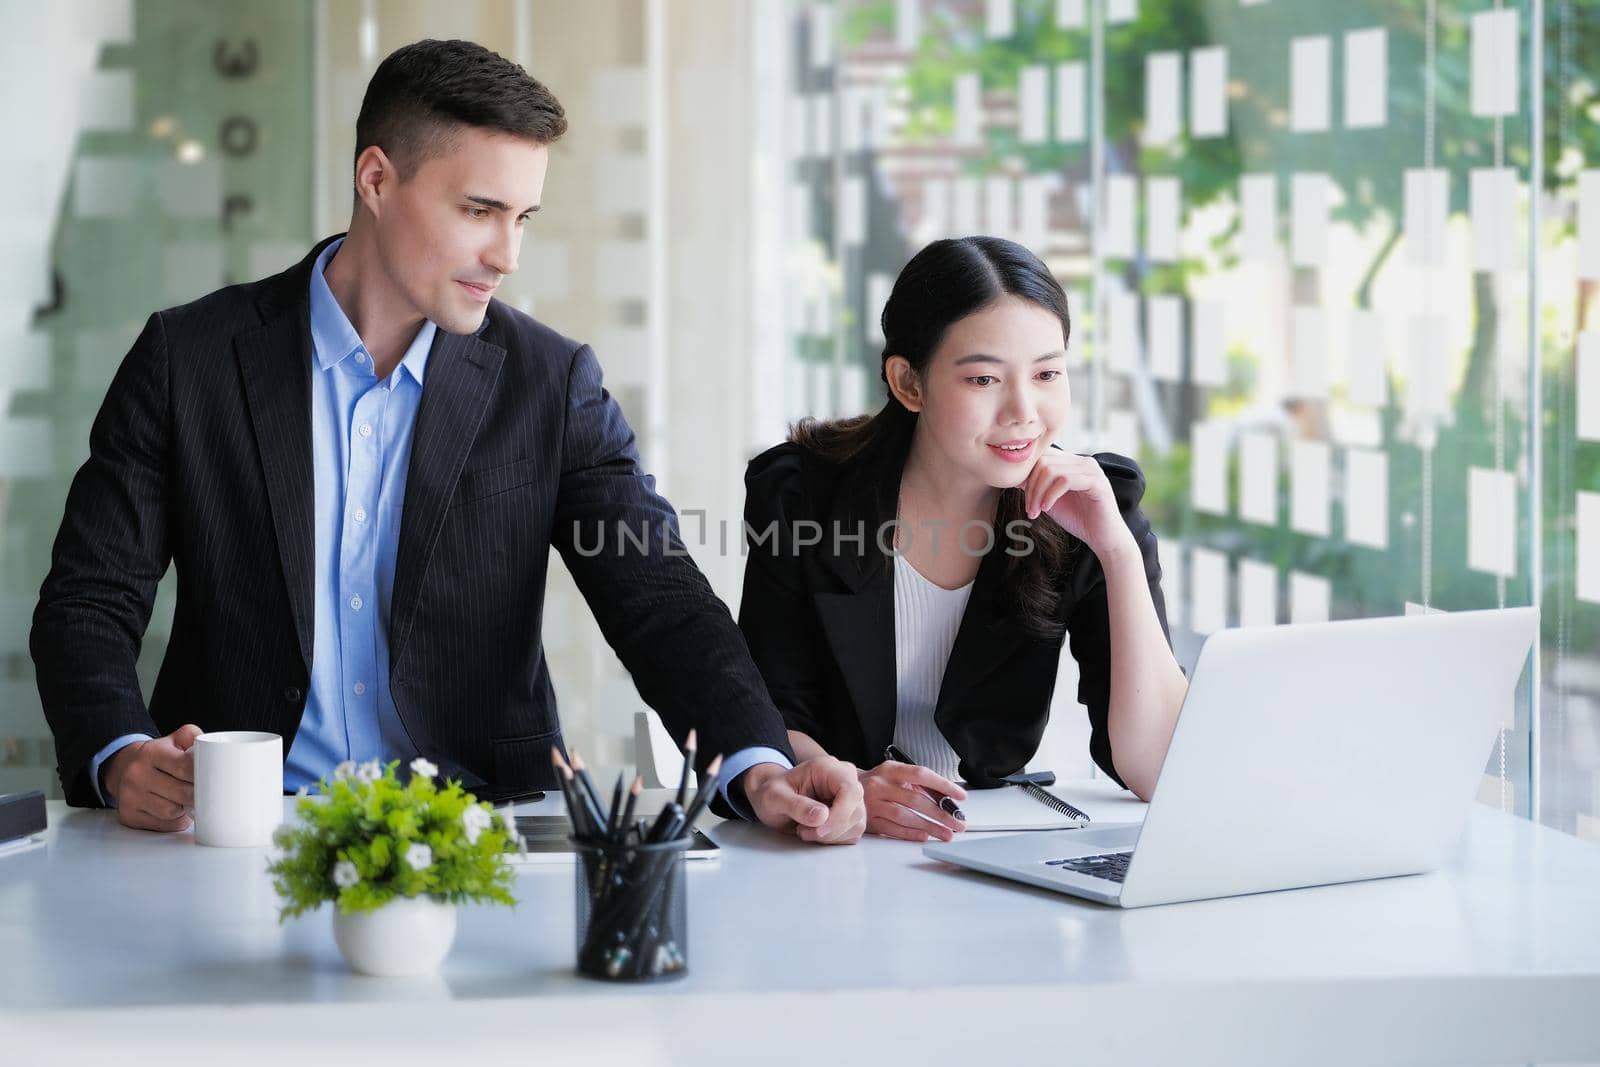 Planning the investment budget, the male advisor is explaining the plan strategy to the female business owner to manage the company's investment budget. by Manastrong